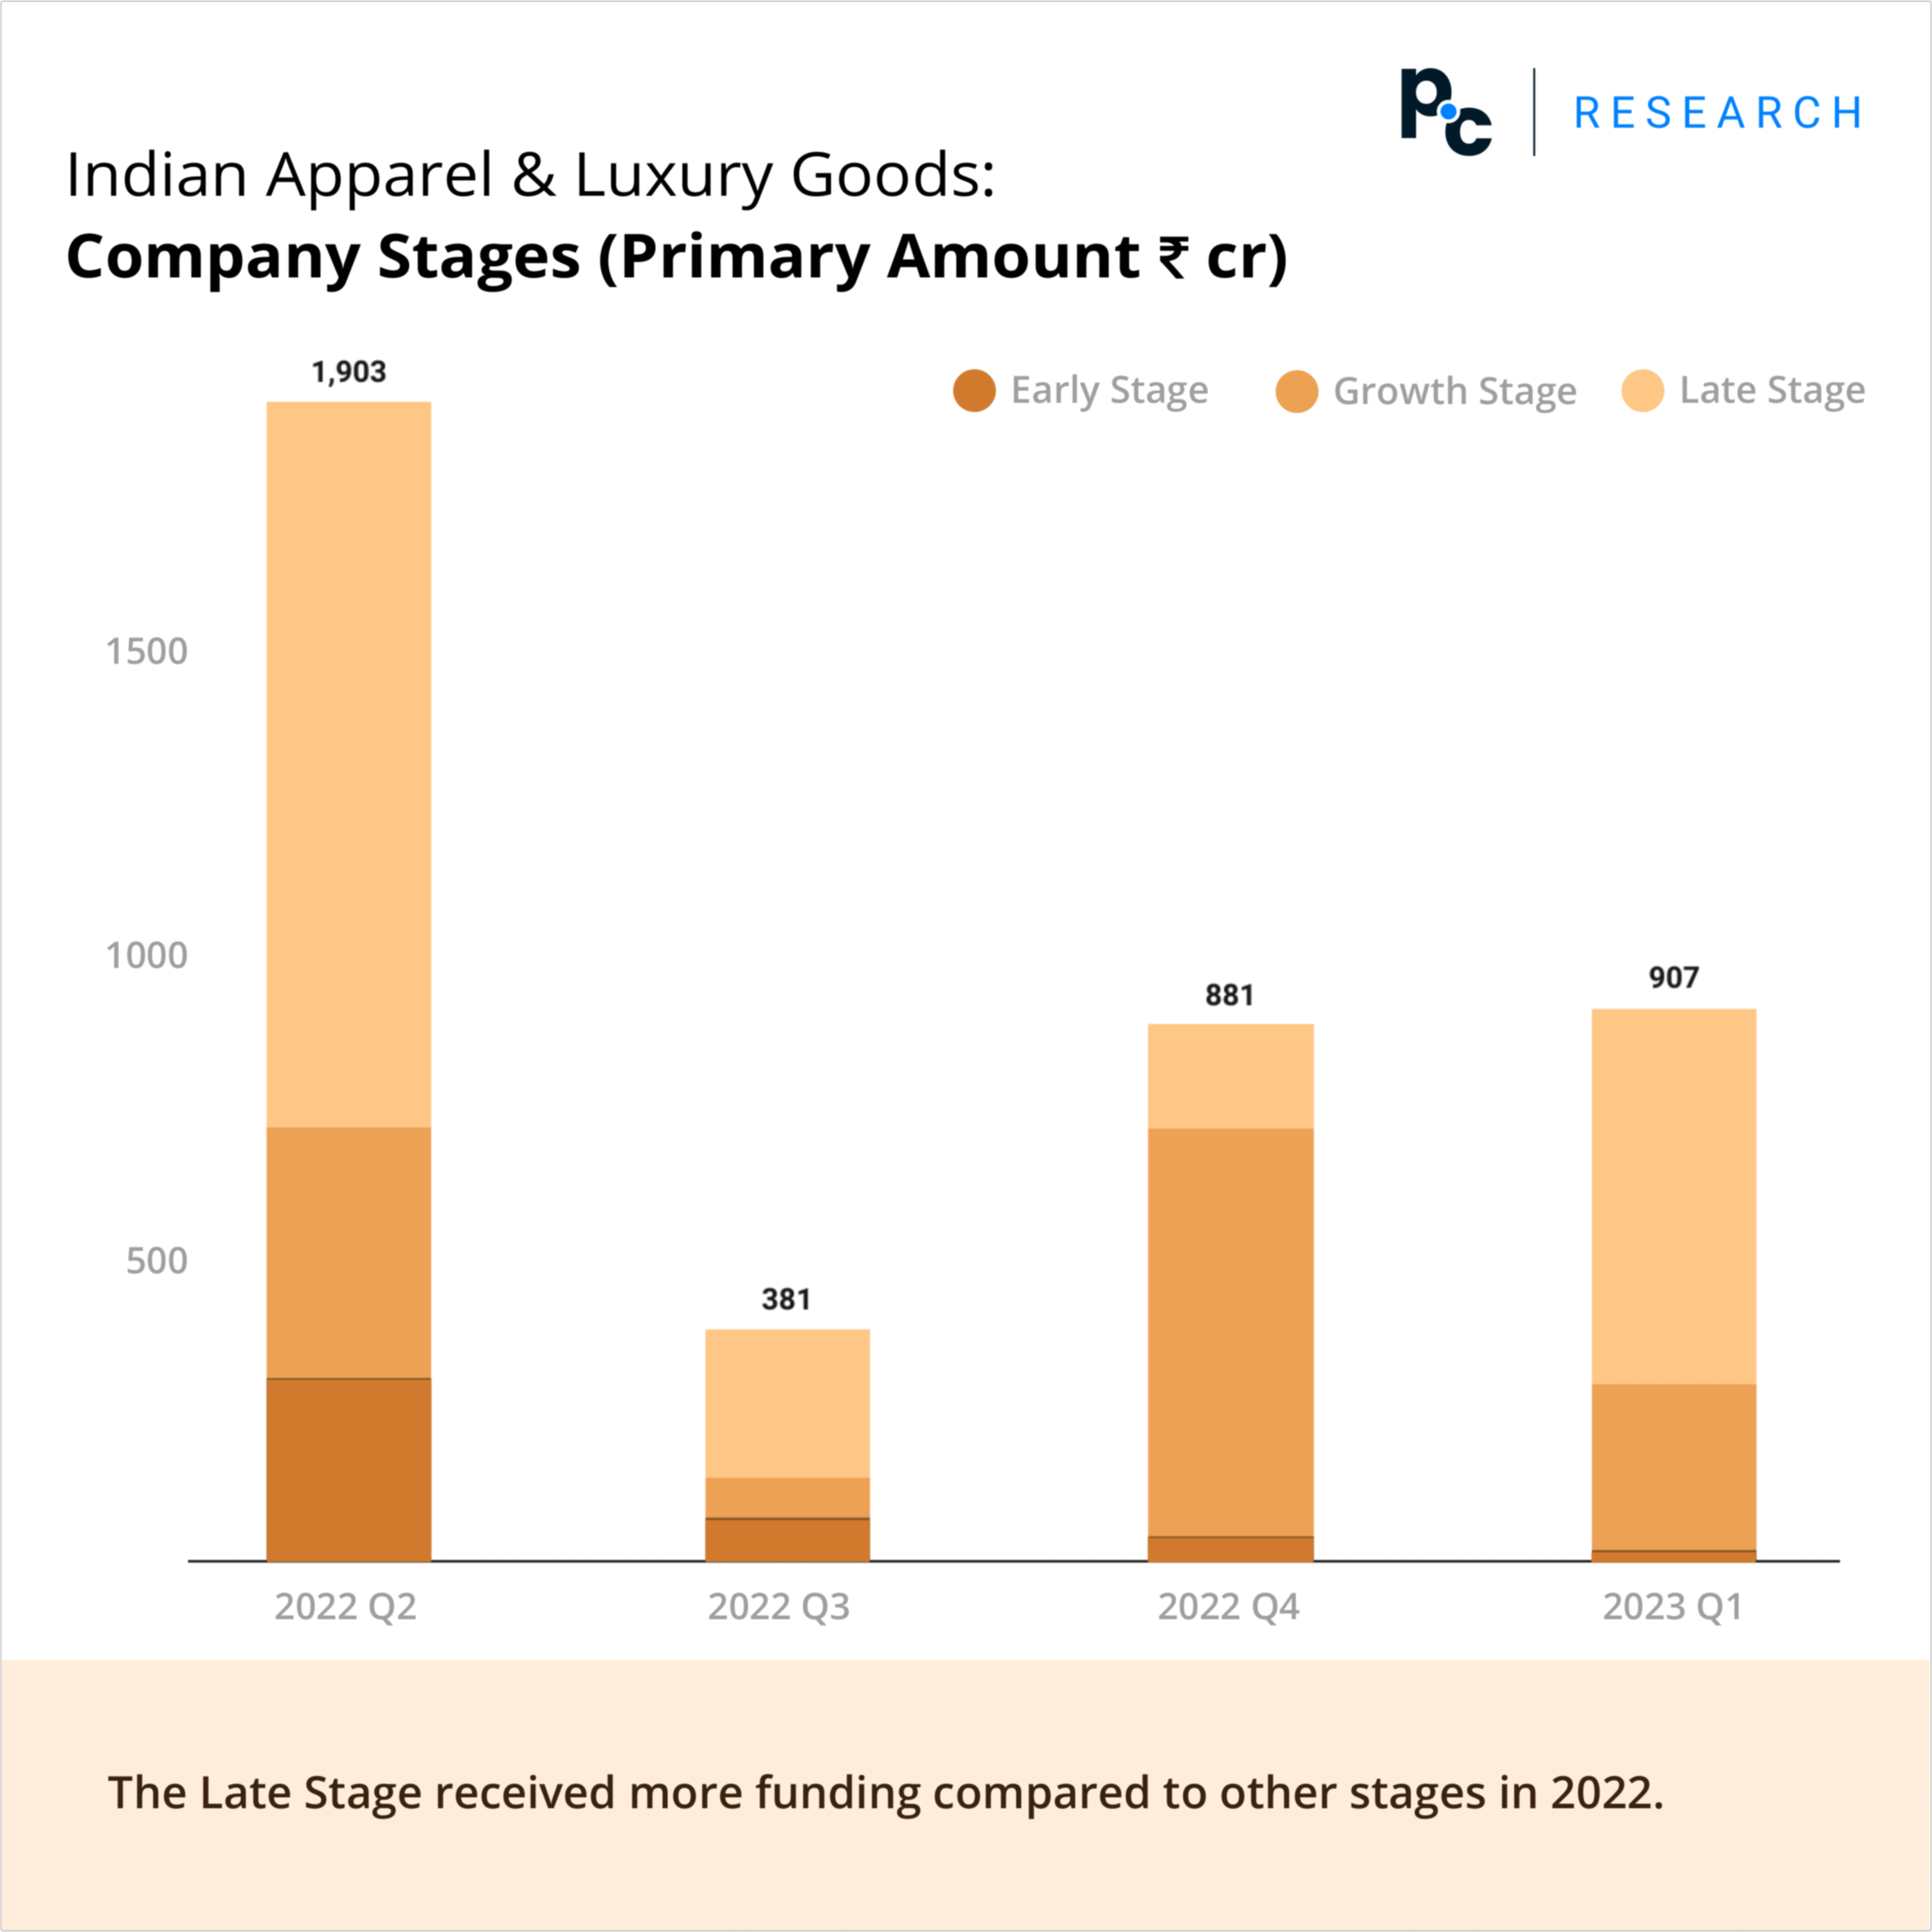 Indian Apparel & Luxury Goods: Company Stages (Primary Amount ₹ cr).

The Late Stage received more funding compared to other stages in 2022.